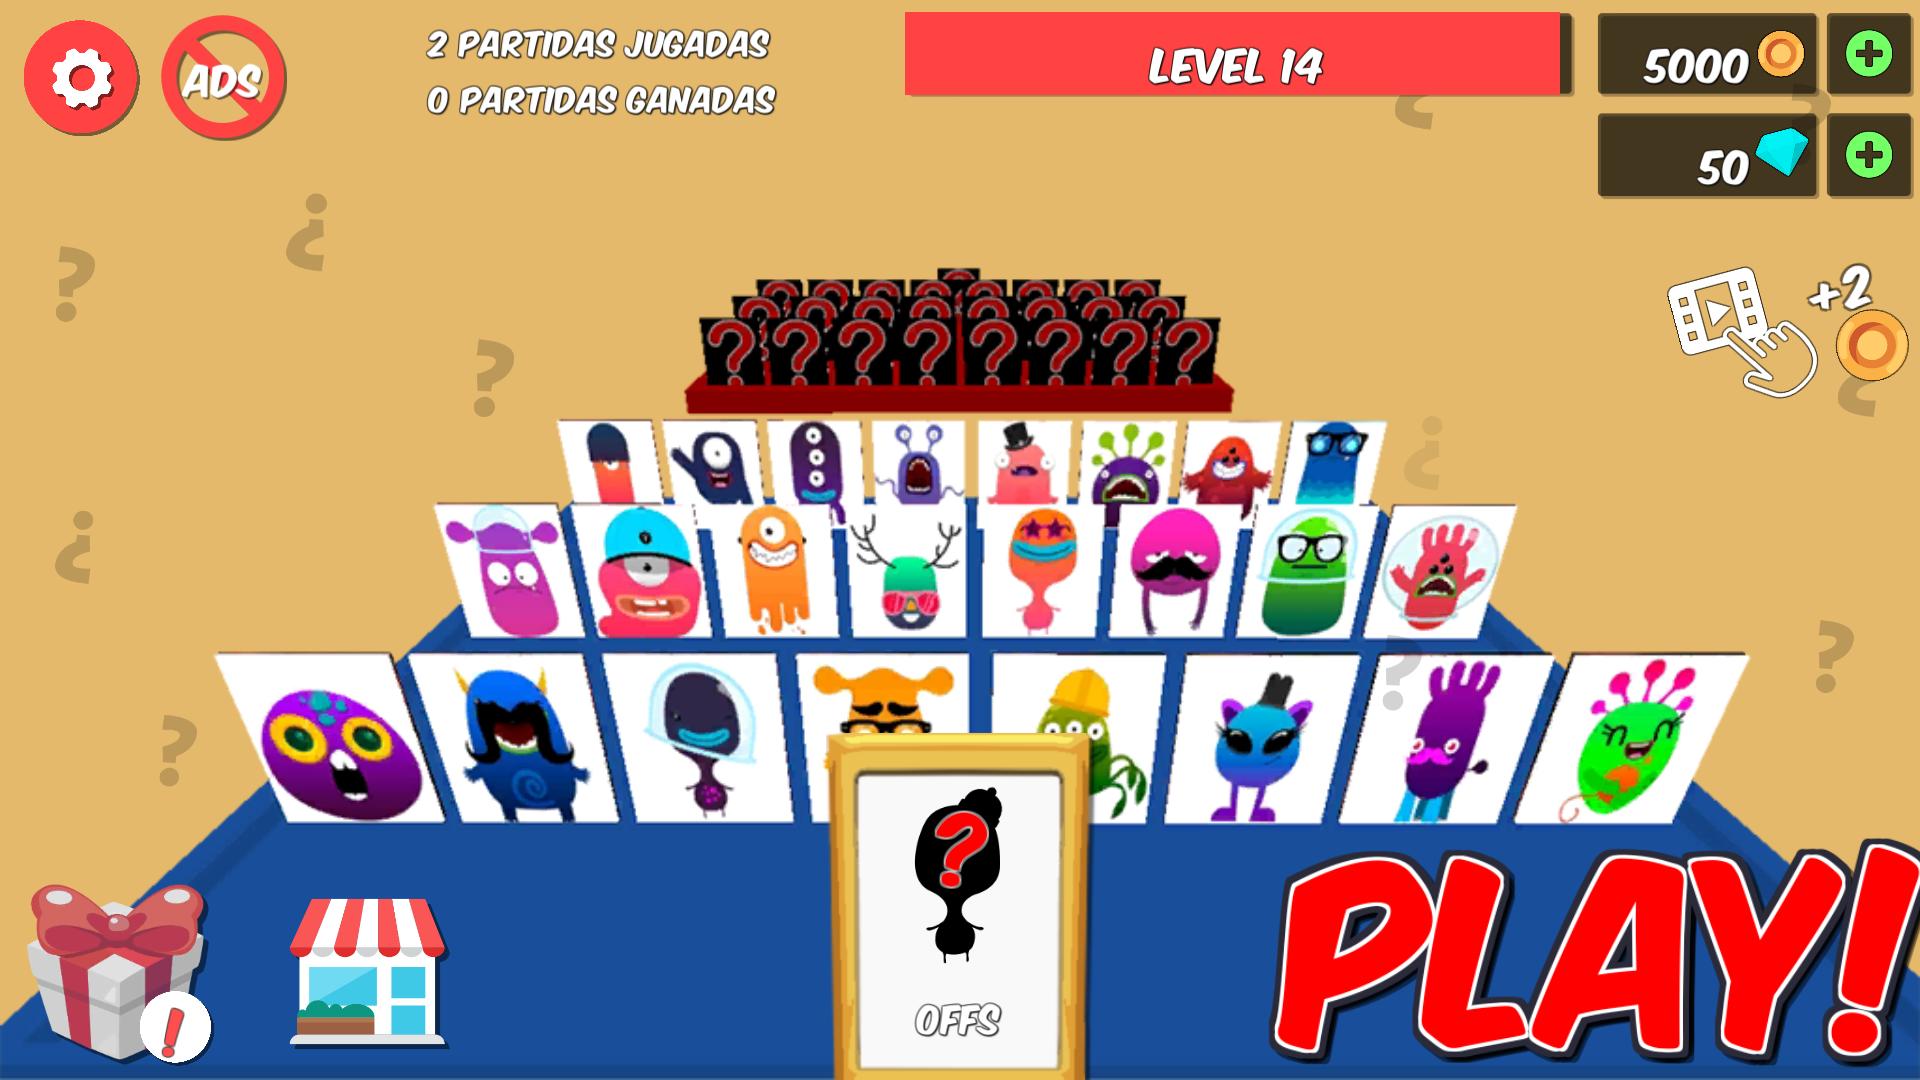 Board Game - Guess who? What's my Character? for Android - APK Download